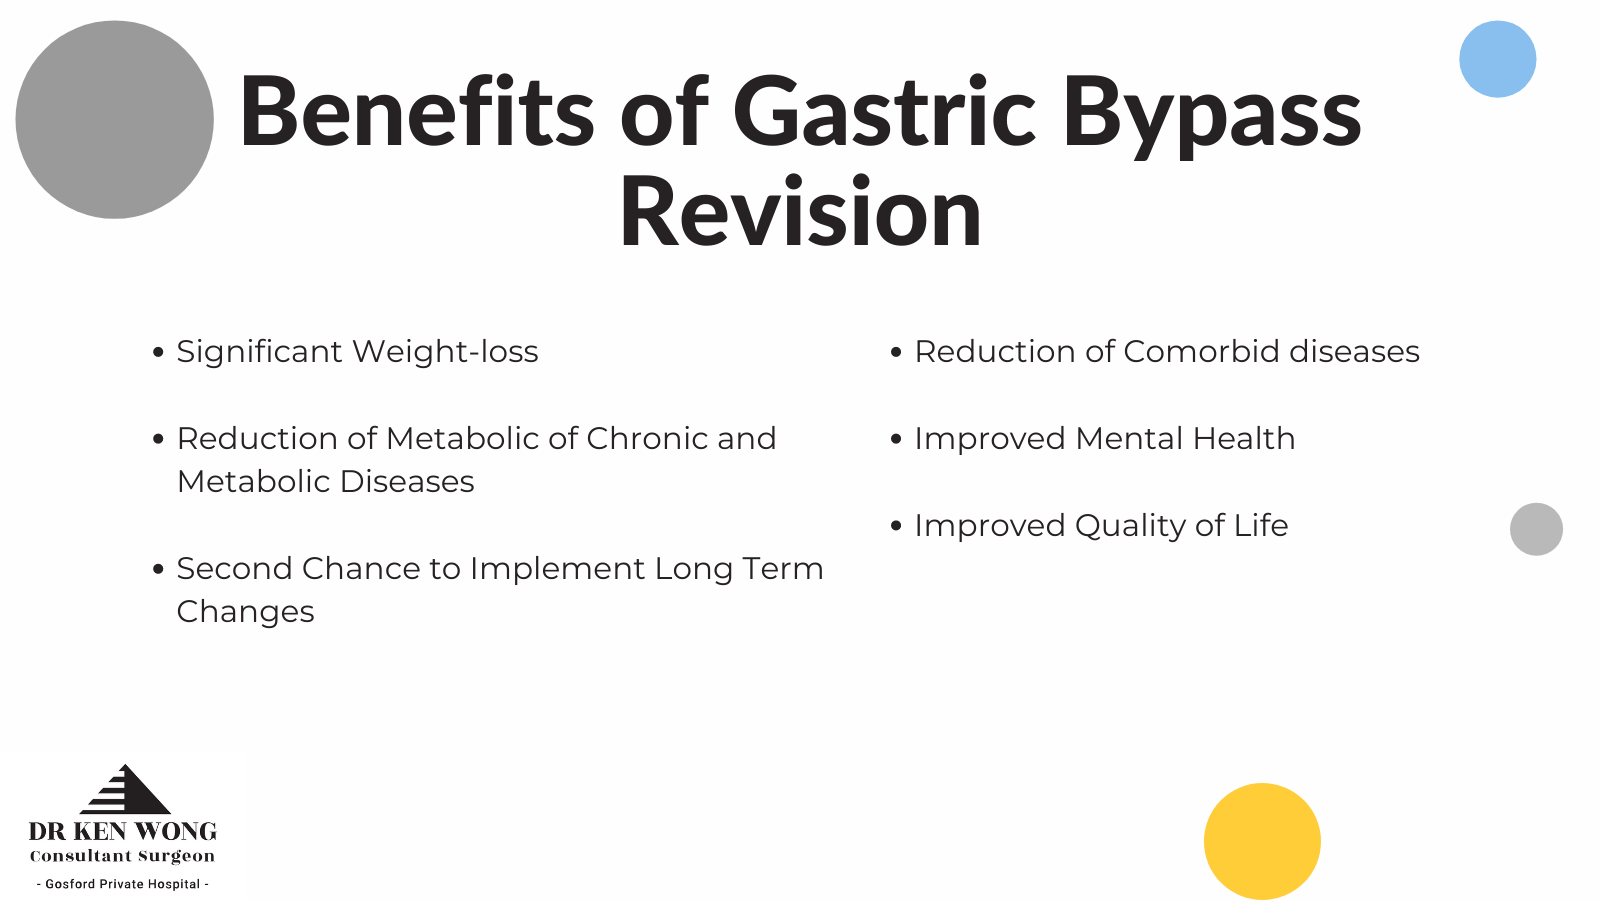 Benefits of gastric bypass revisions